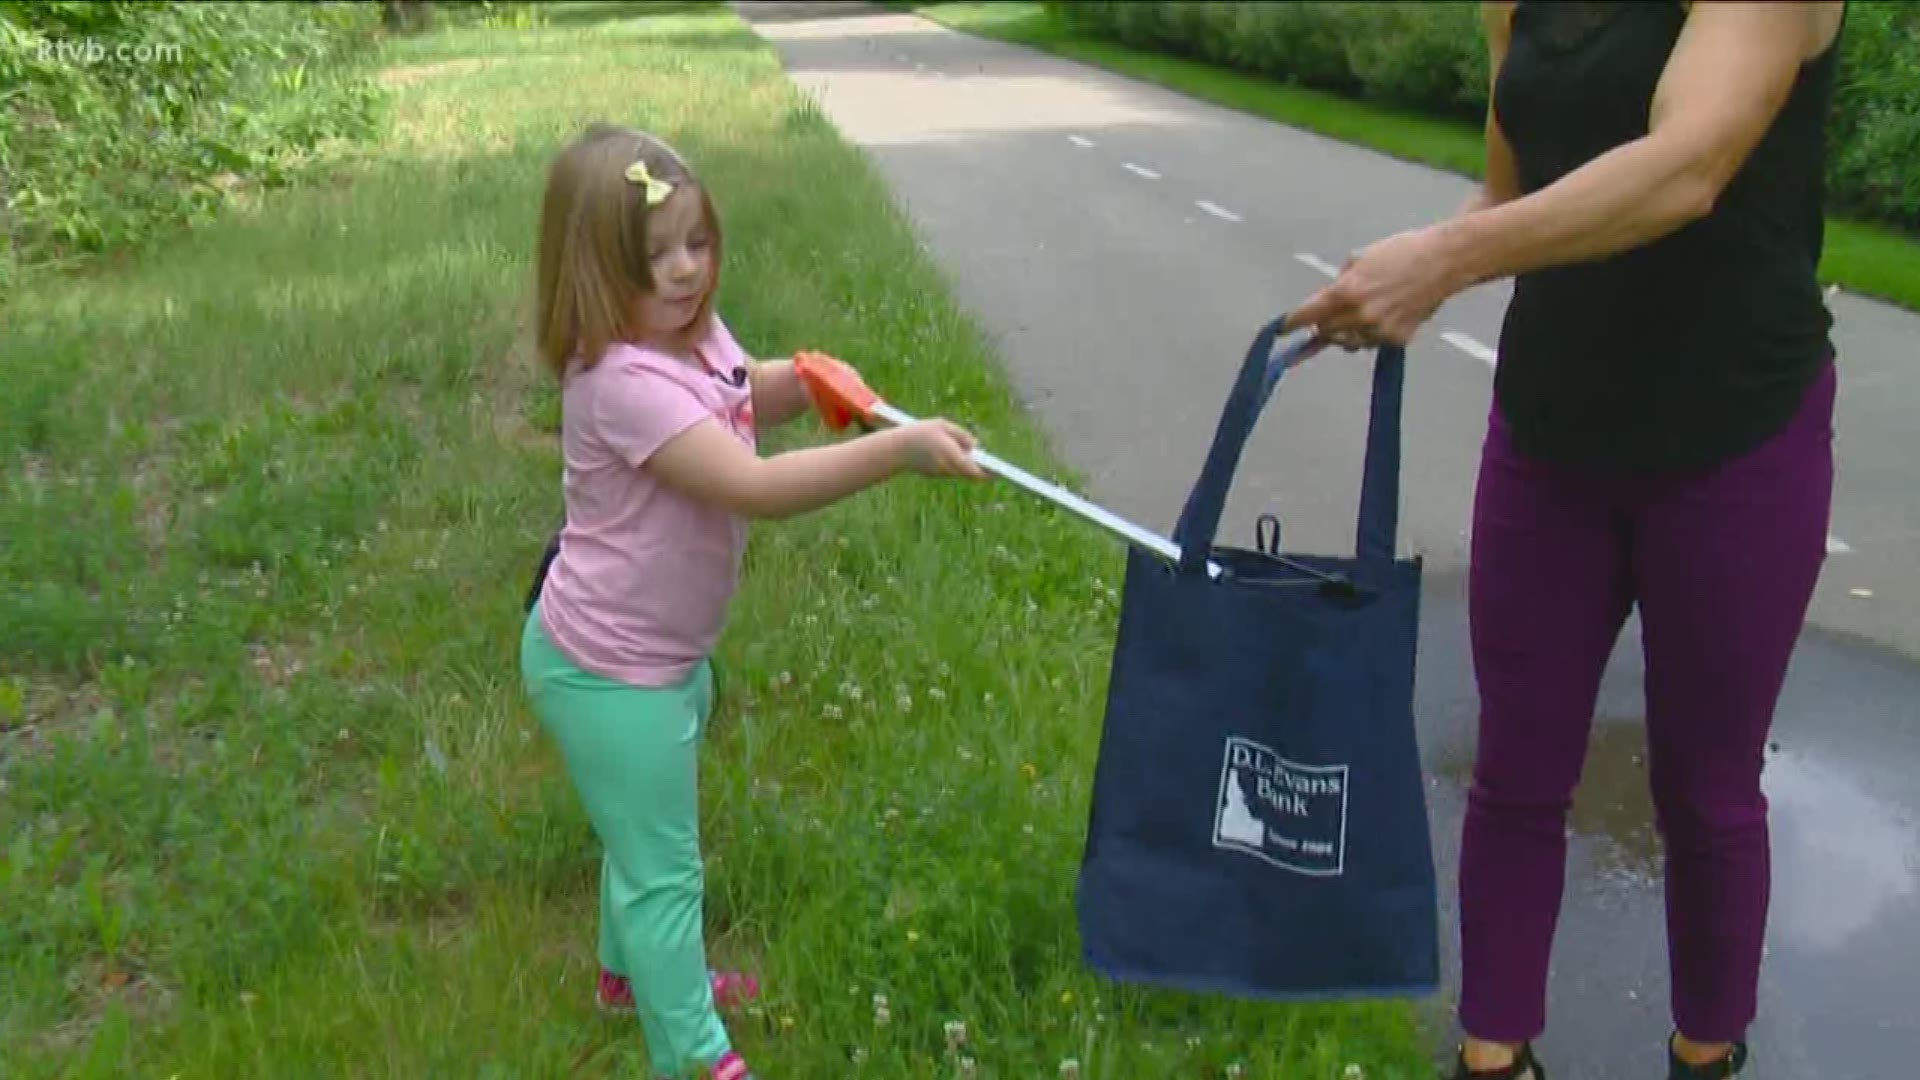 5-year-old London Winner is doing her part to beautify Boise.